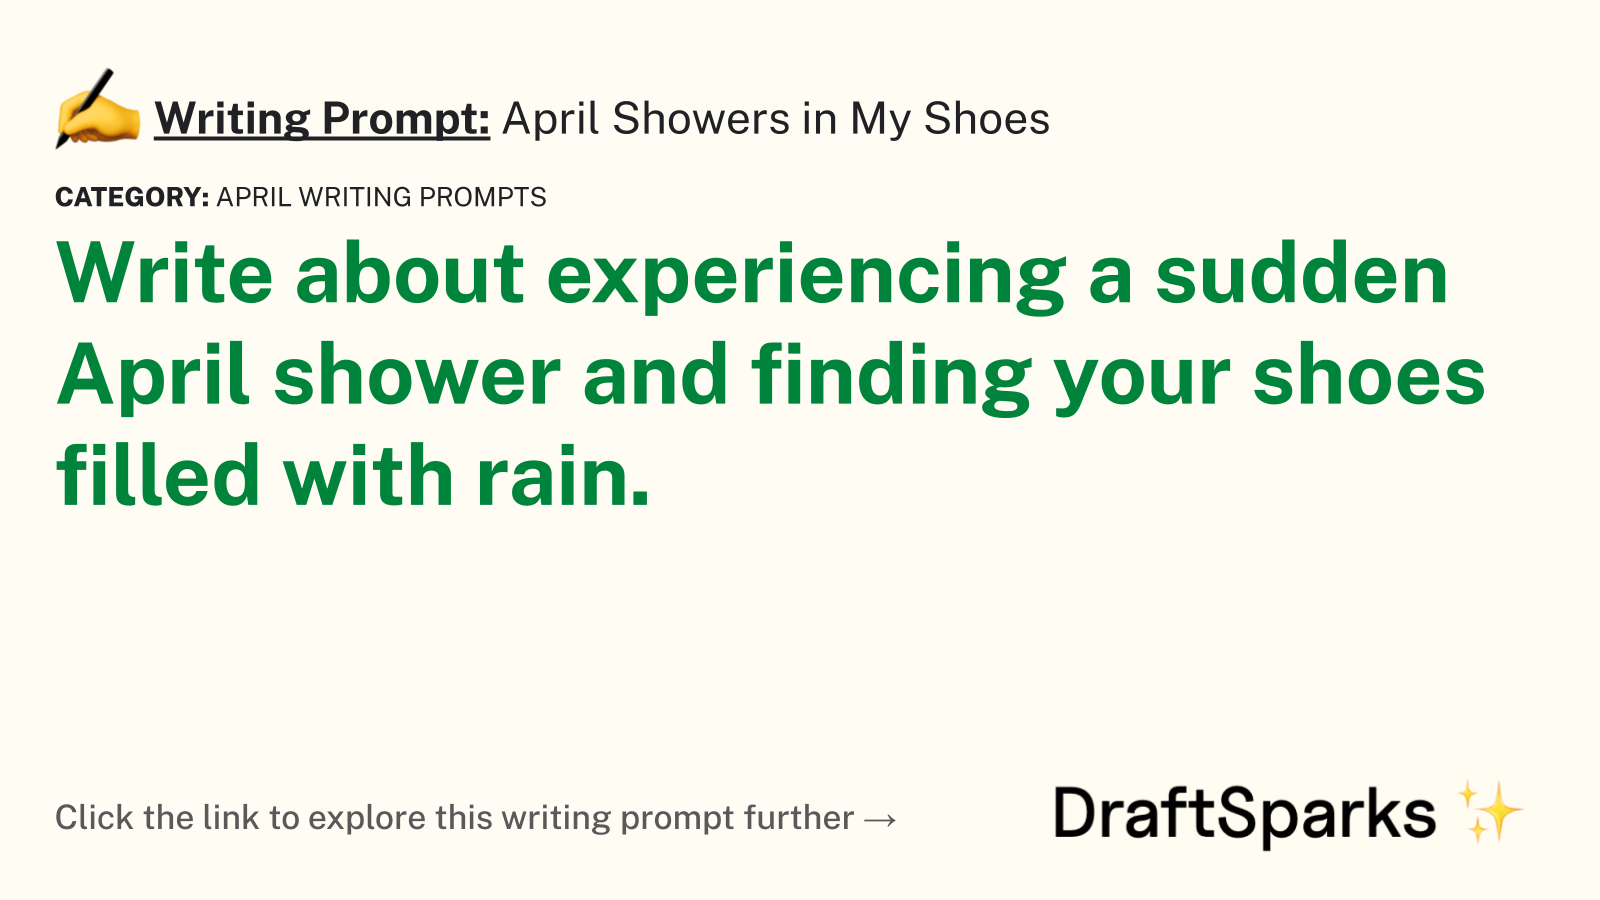 April Showers in My Shoes